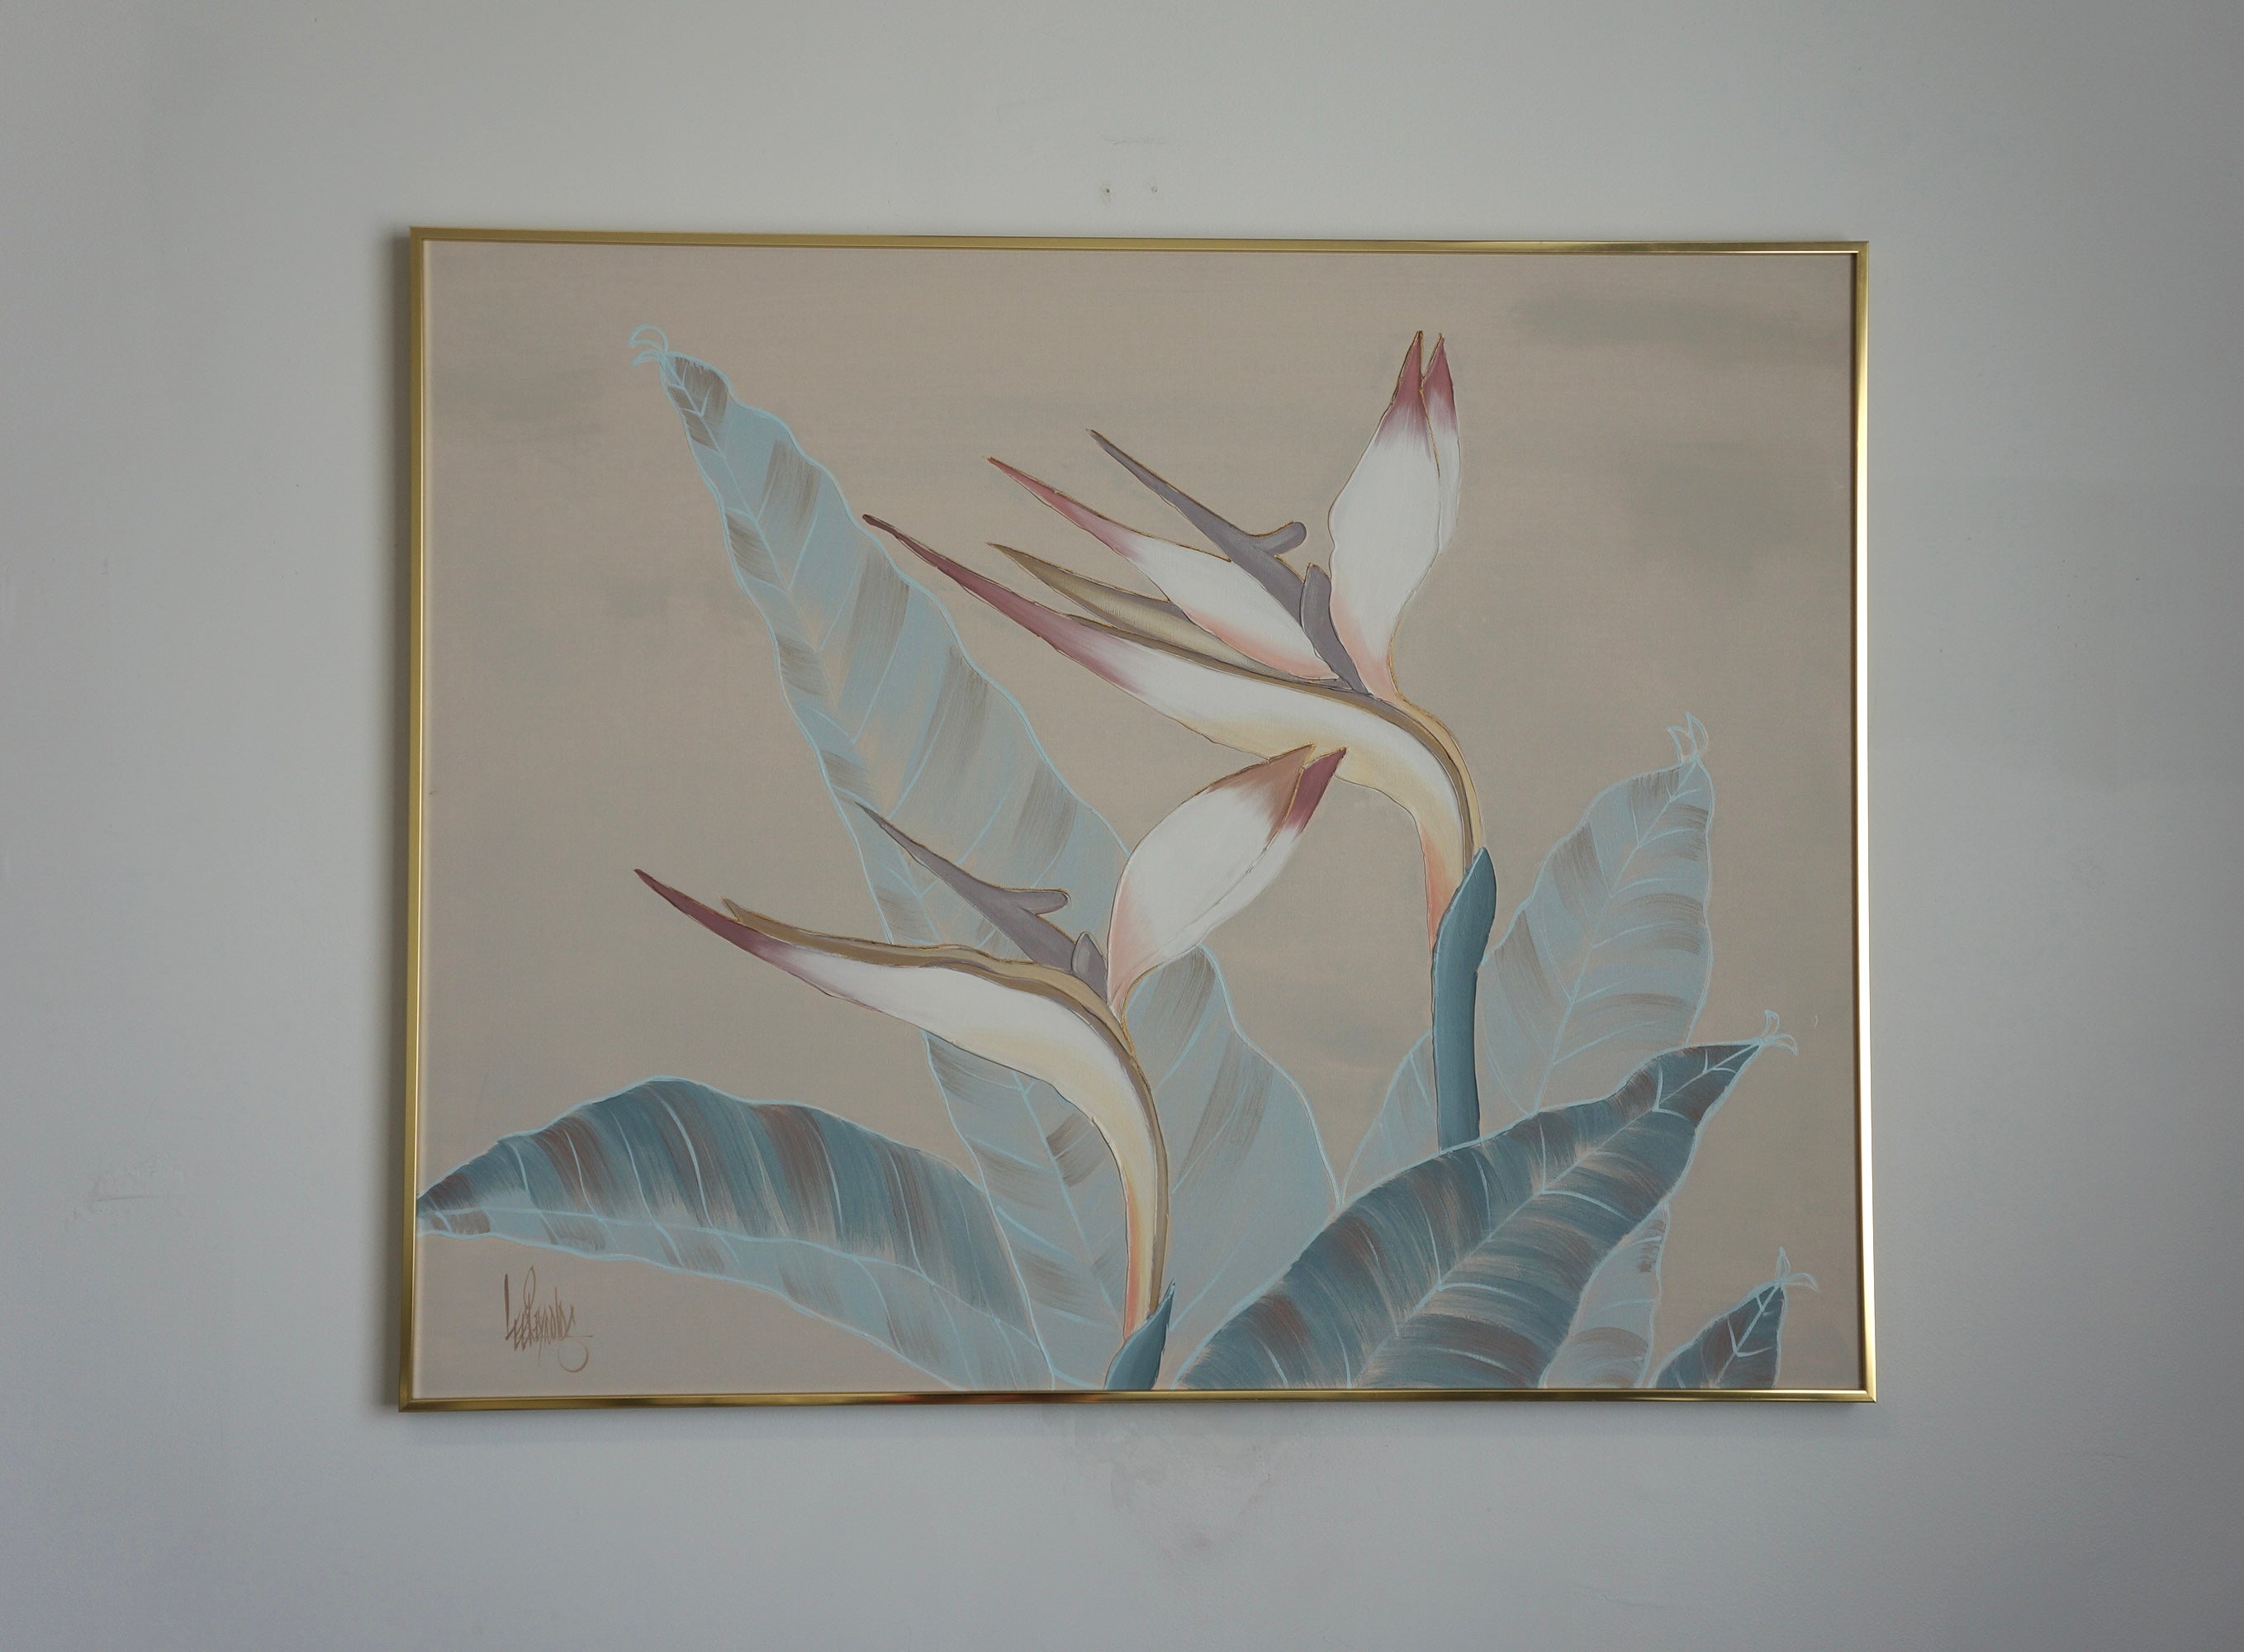 Original oil on canvas painting by Lee Reynolds. This floral oil painting features birds of paradise florals and leaves. The floral pedals are painted in white with pinkish brown ombré tips, the leaves are in a blue tone with brown accents. The oil